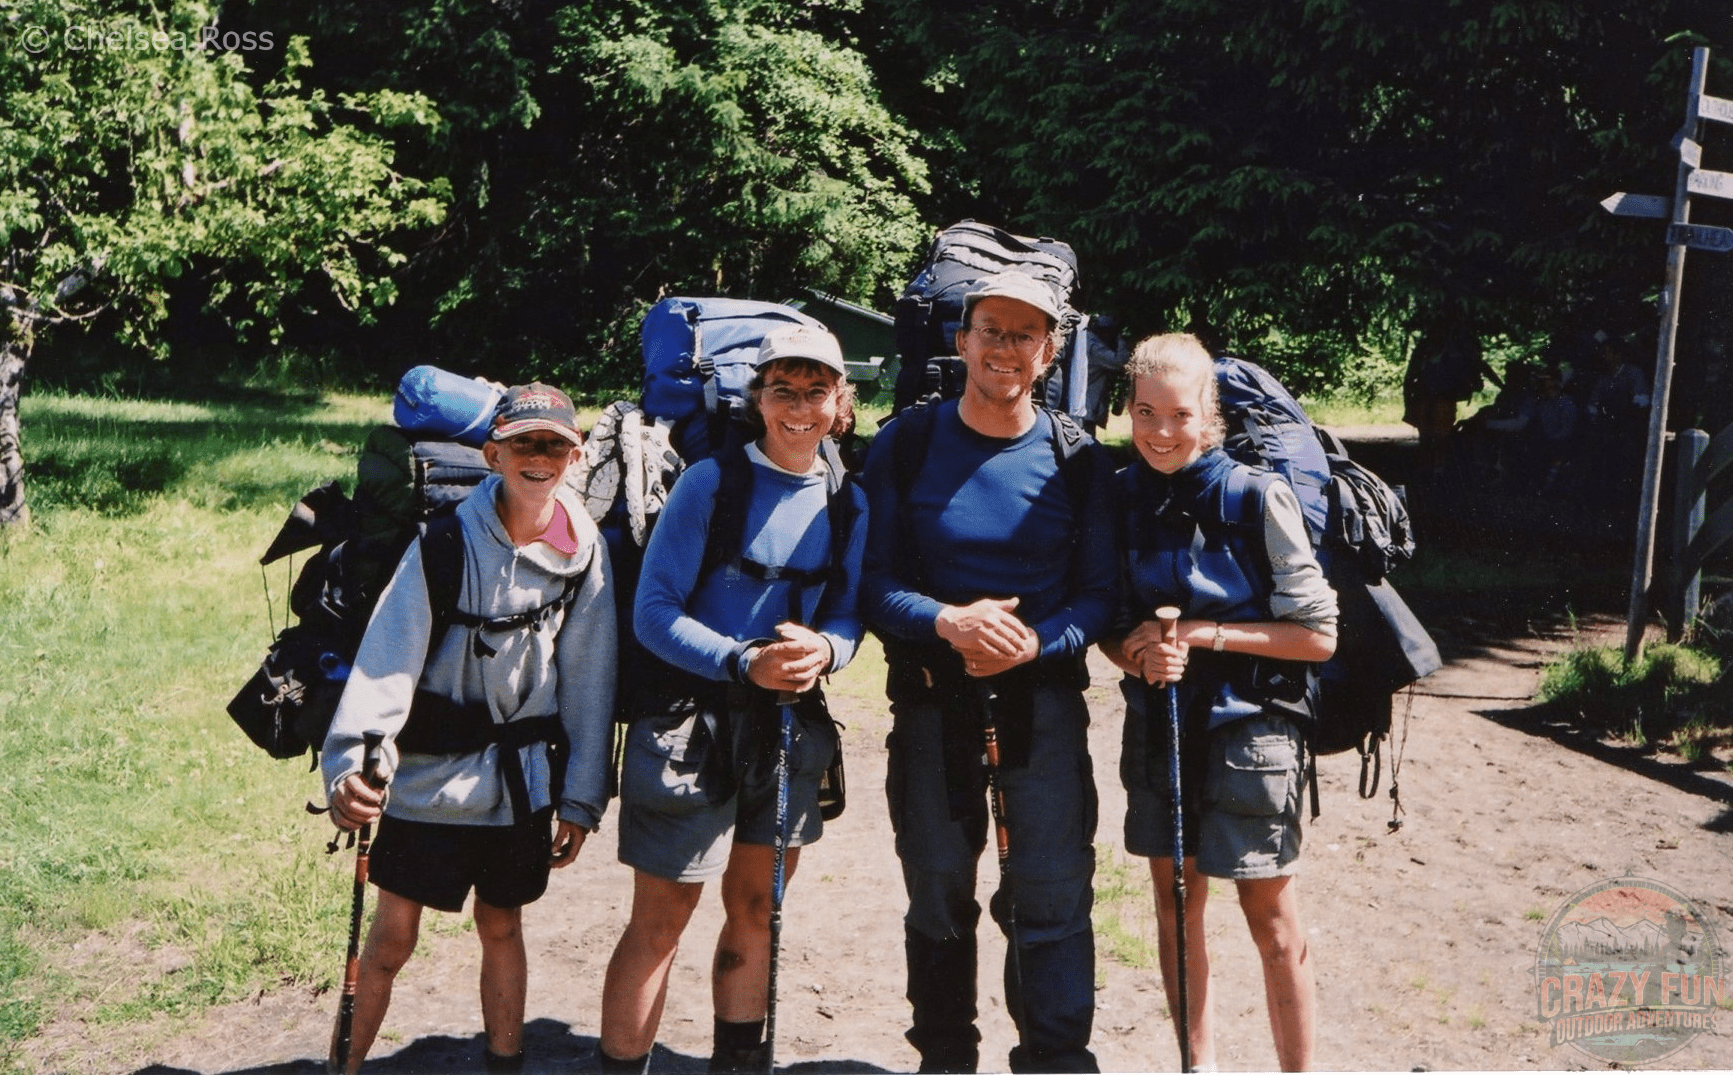 West Coast Trail tips: the first time family photo